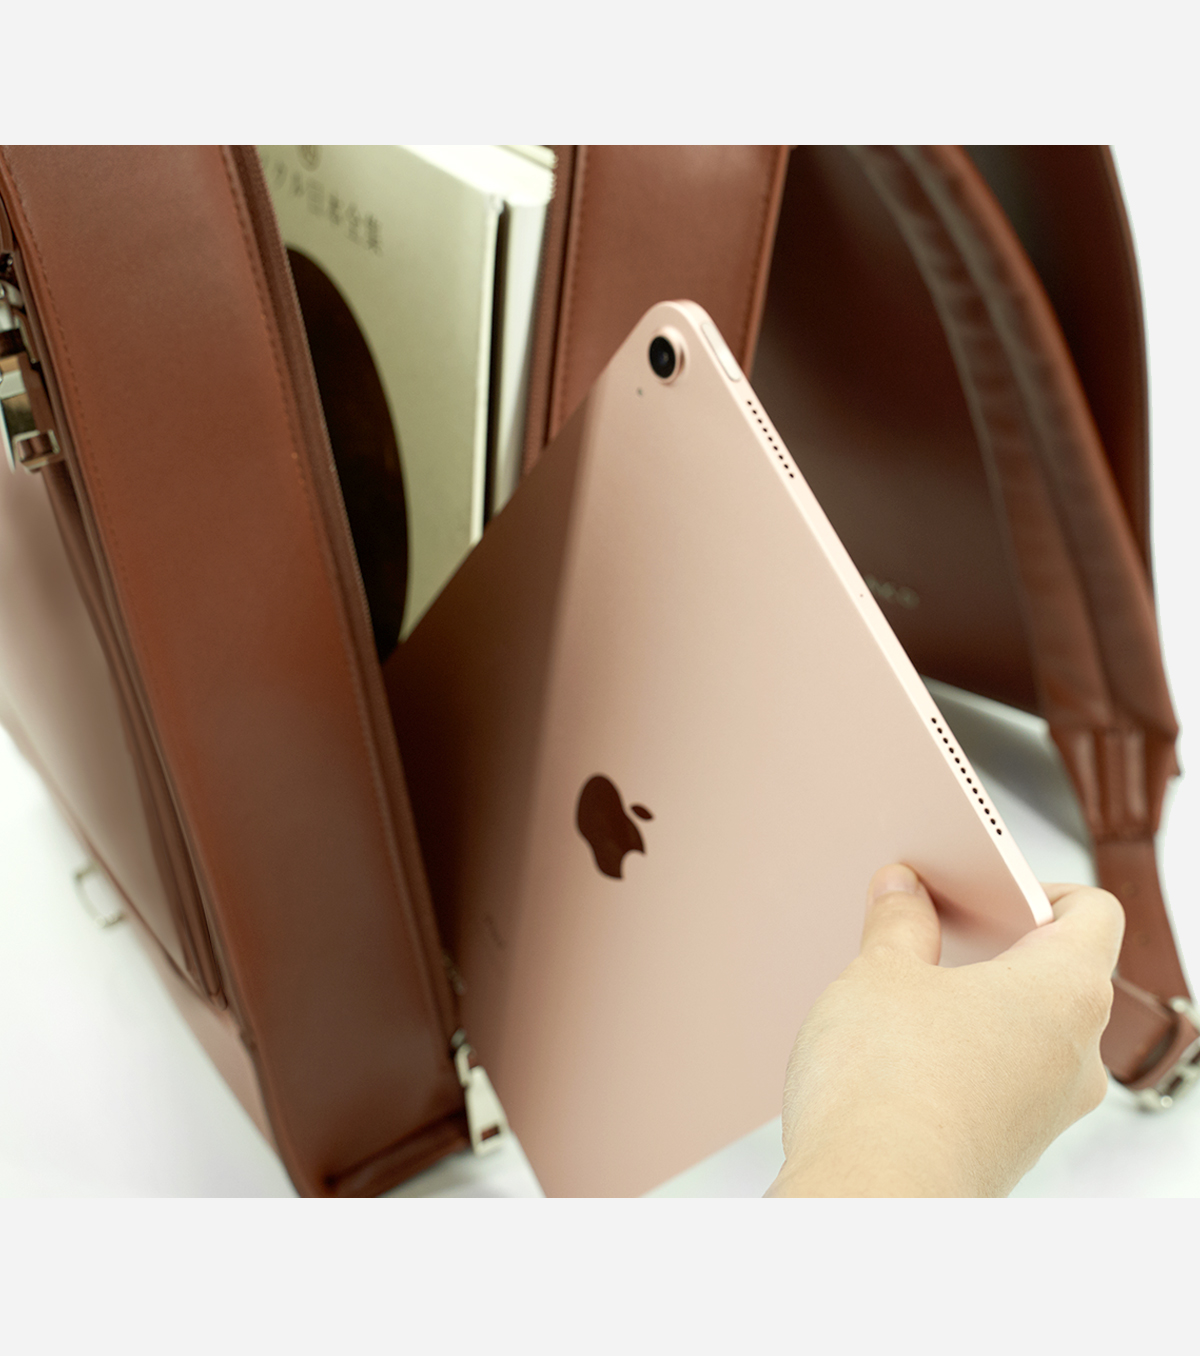 iPad and tech compartment of brown vegan leather backpack